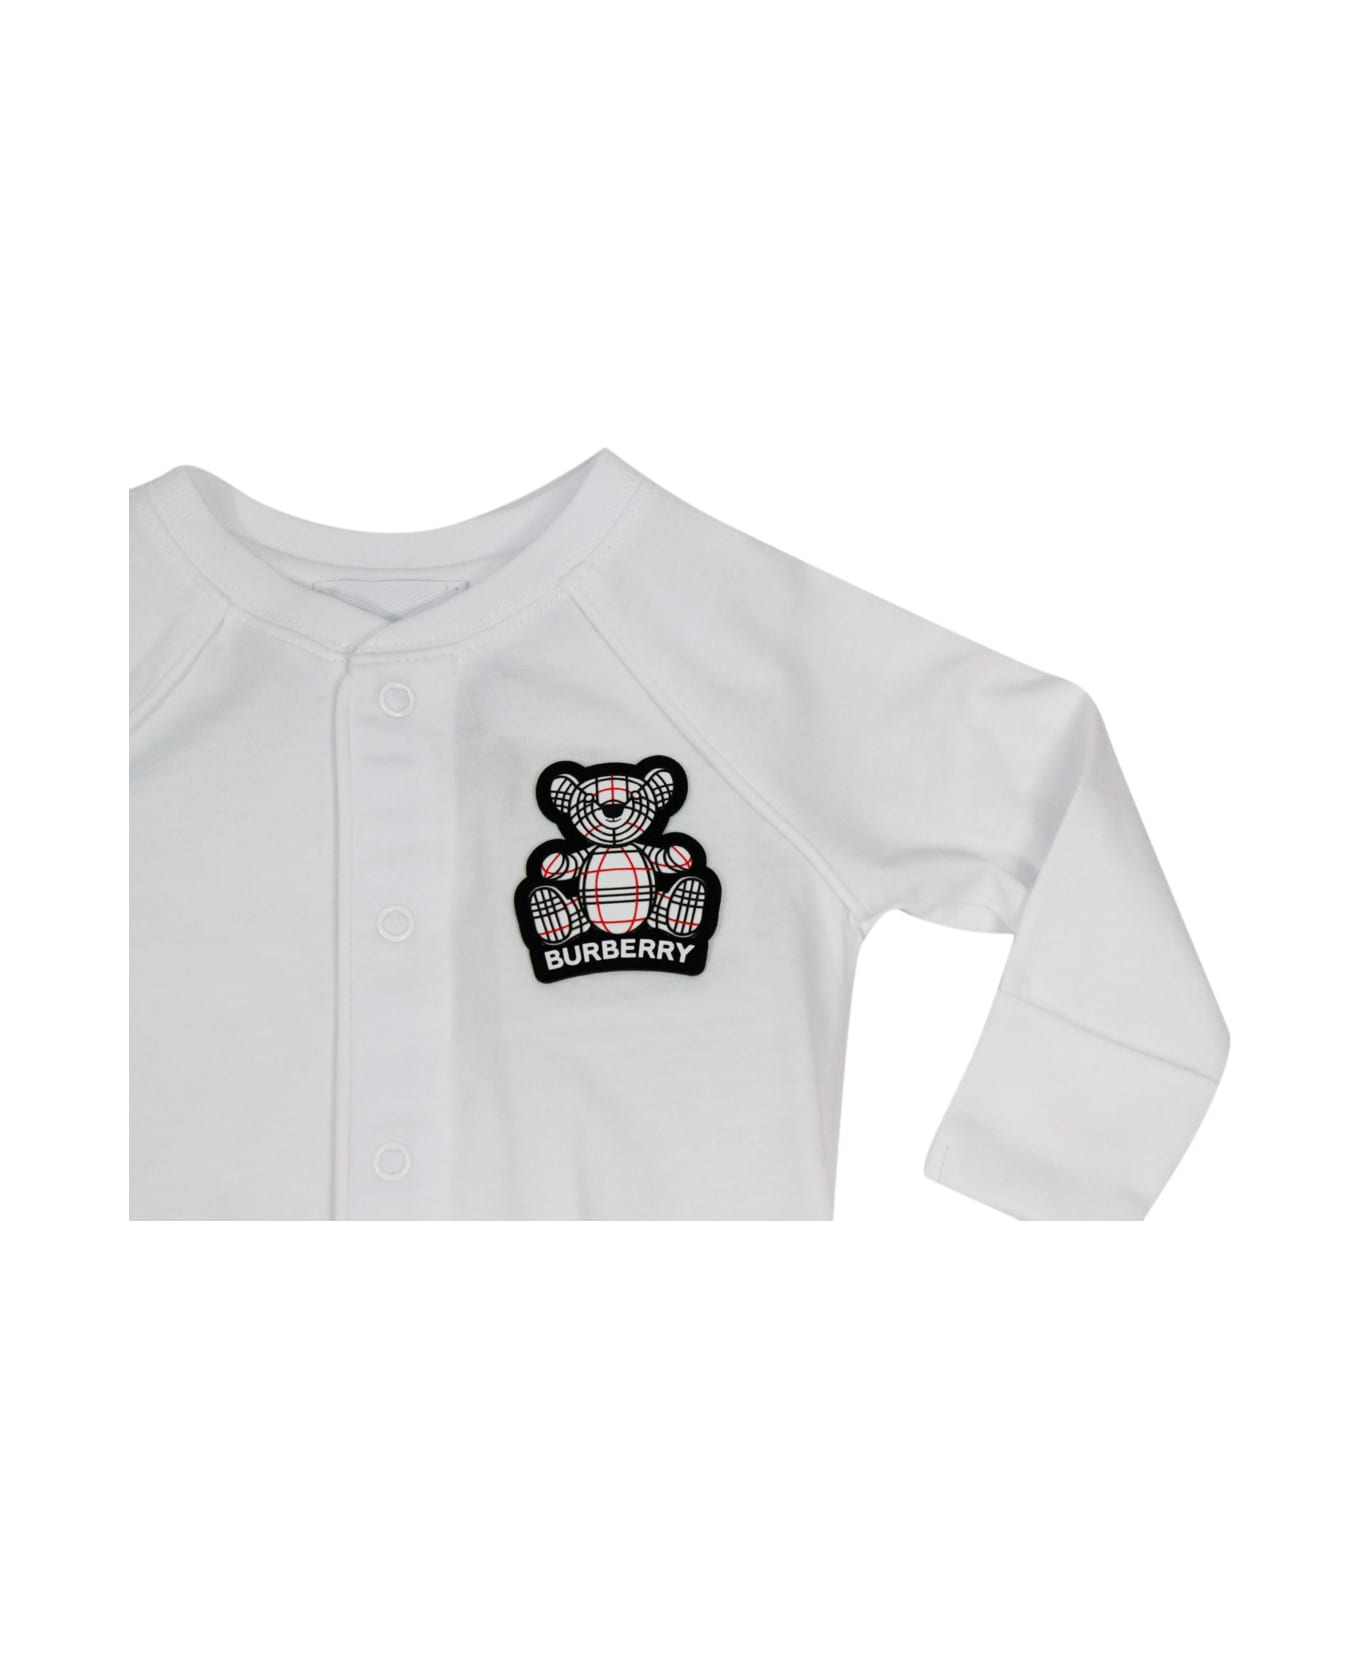 Burberry Organic Cotton Onesie With til Bear Application - White